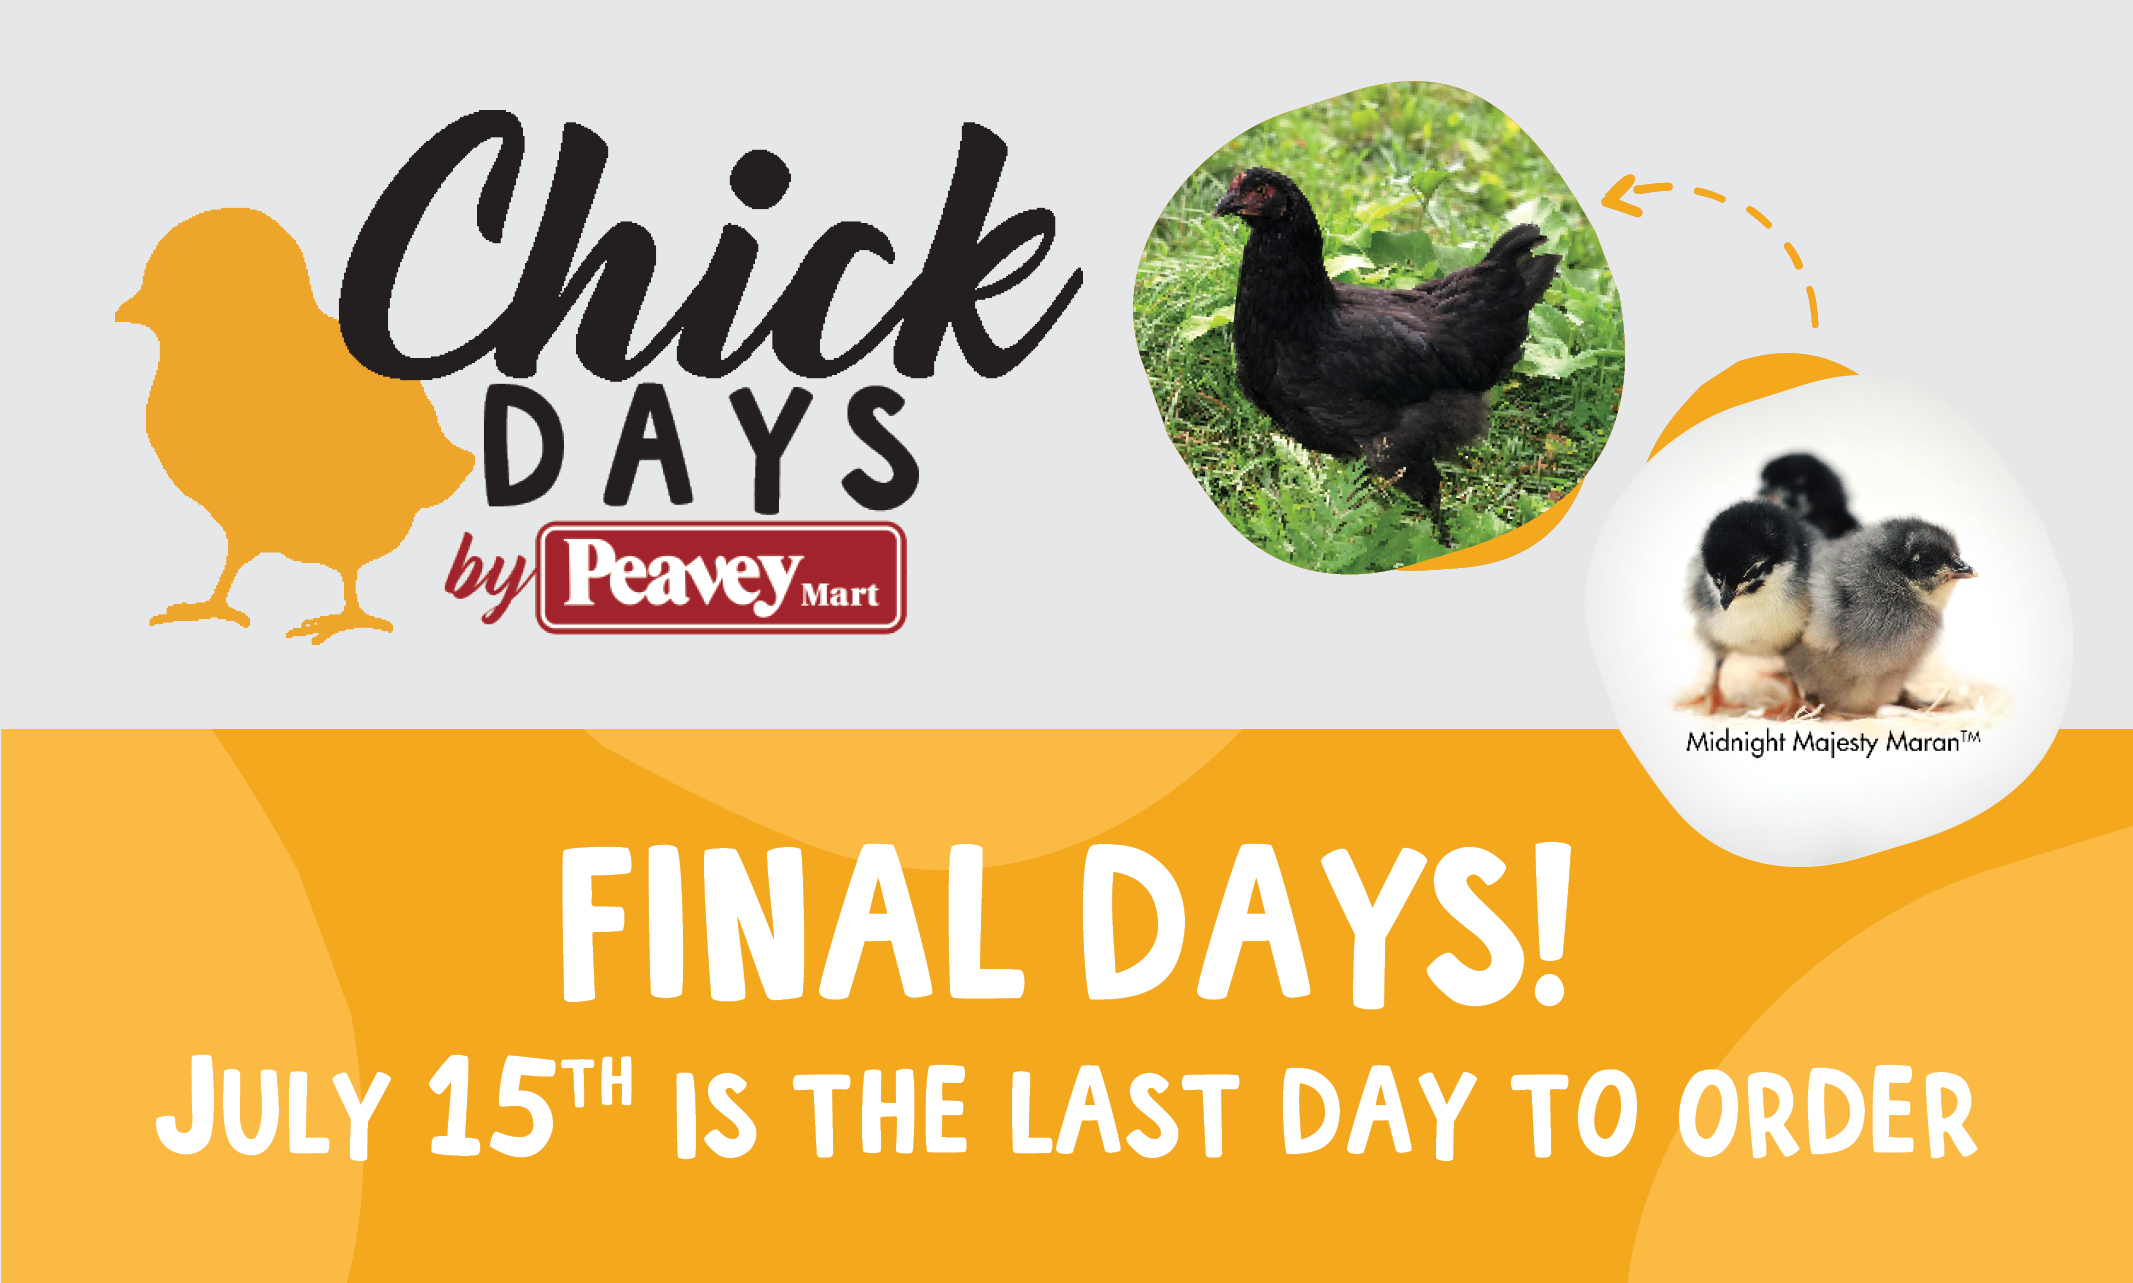 The final days to order your chicks is July 15 - chickdays.ca